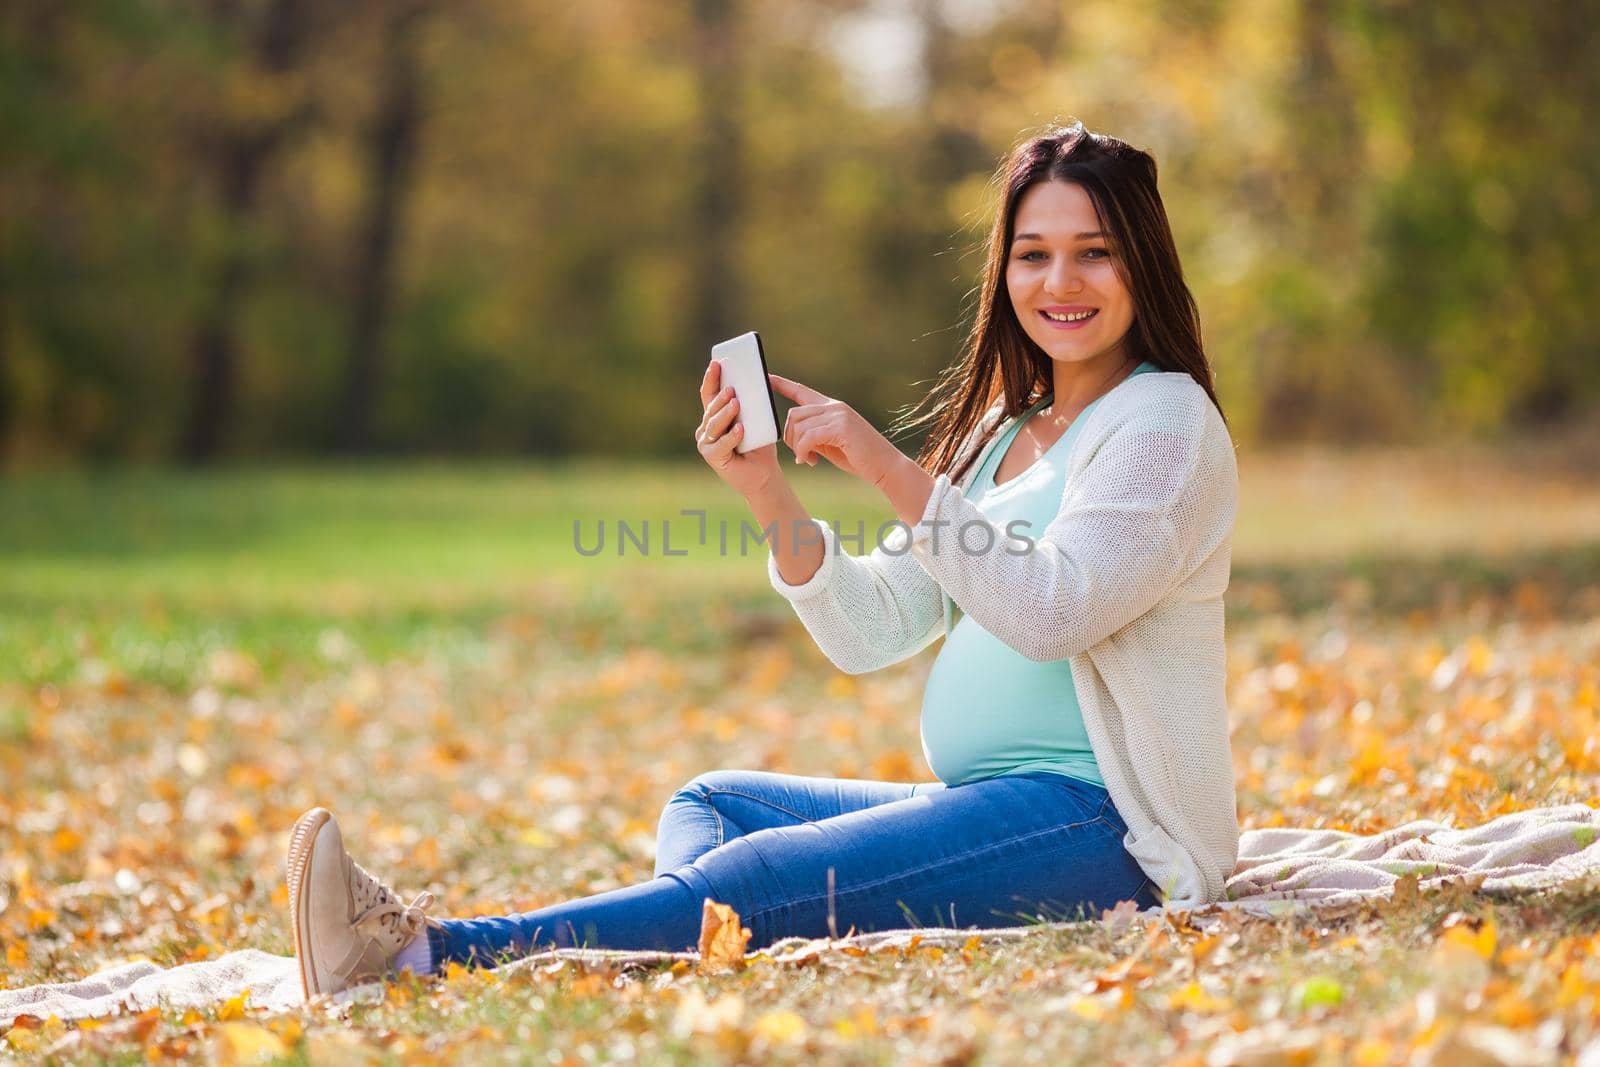 Pregnant woman relaxing in park. She is chatting on digital tablet.